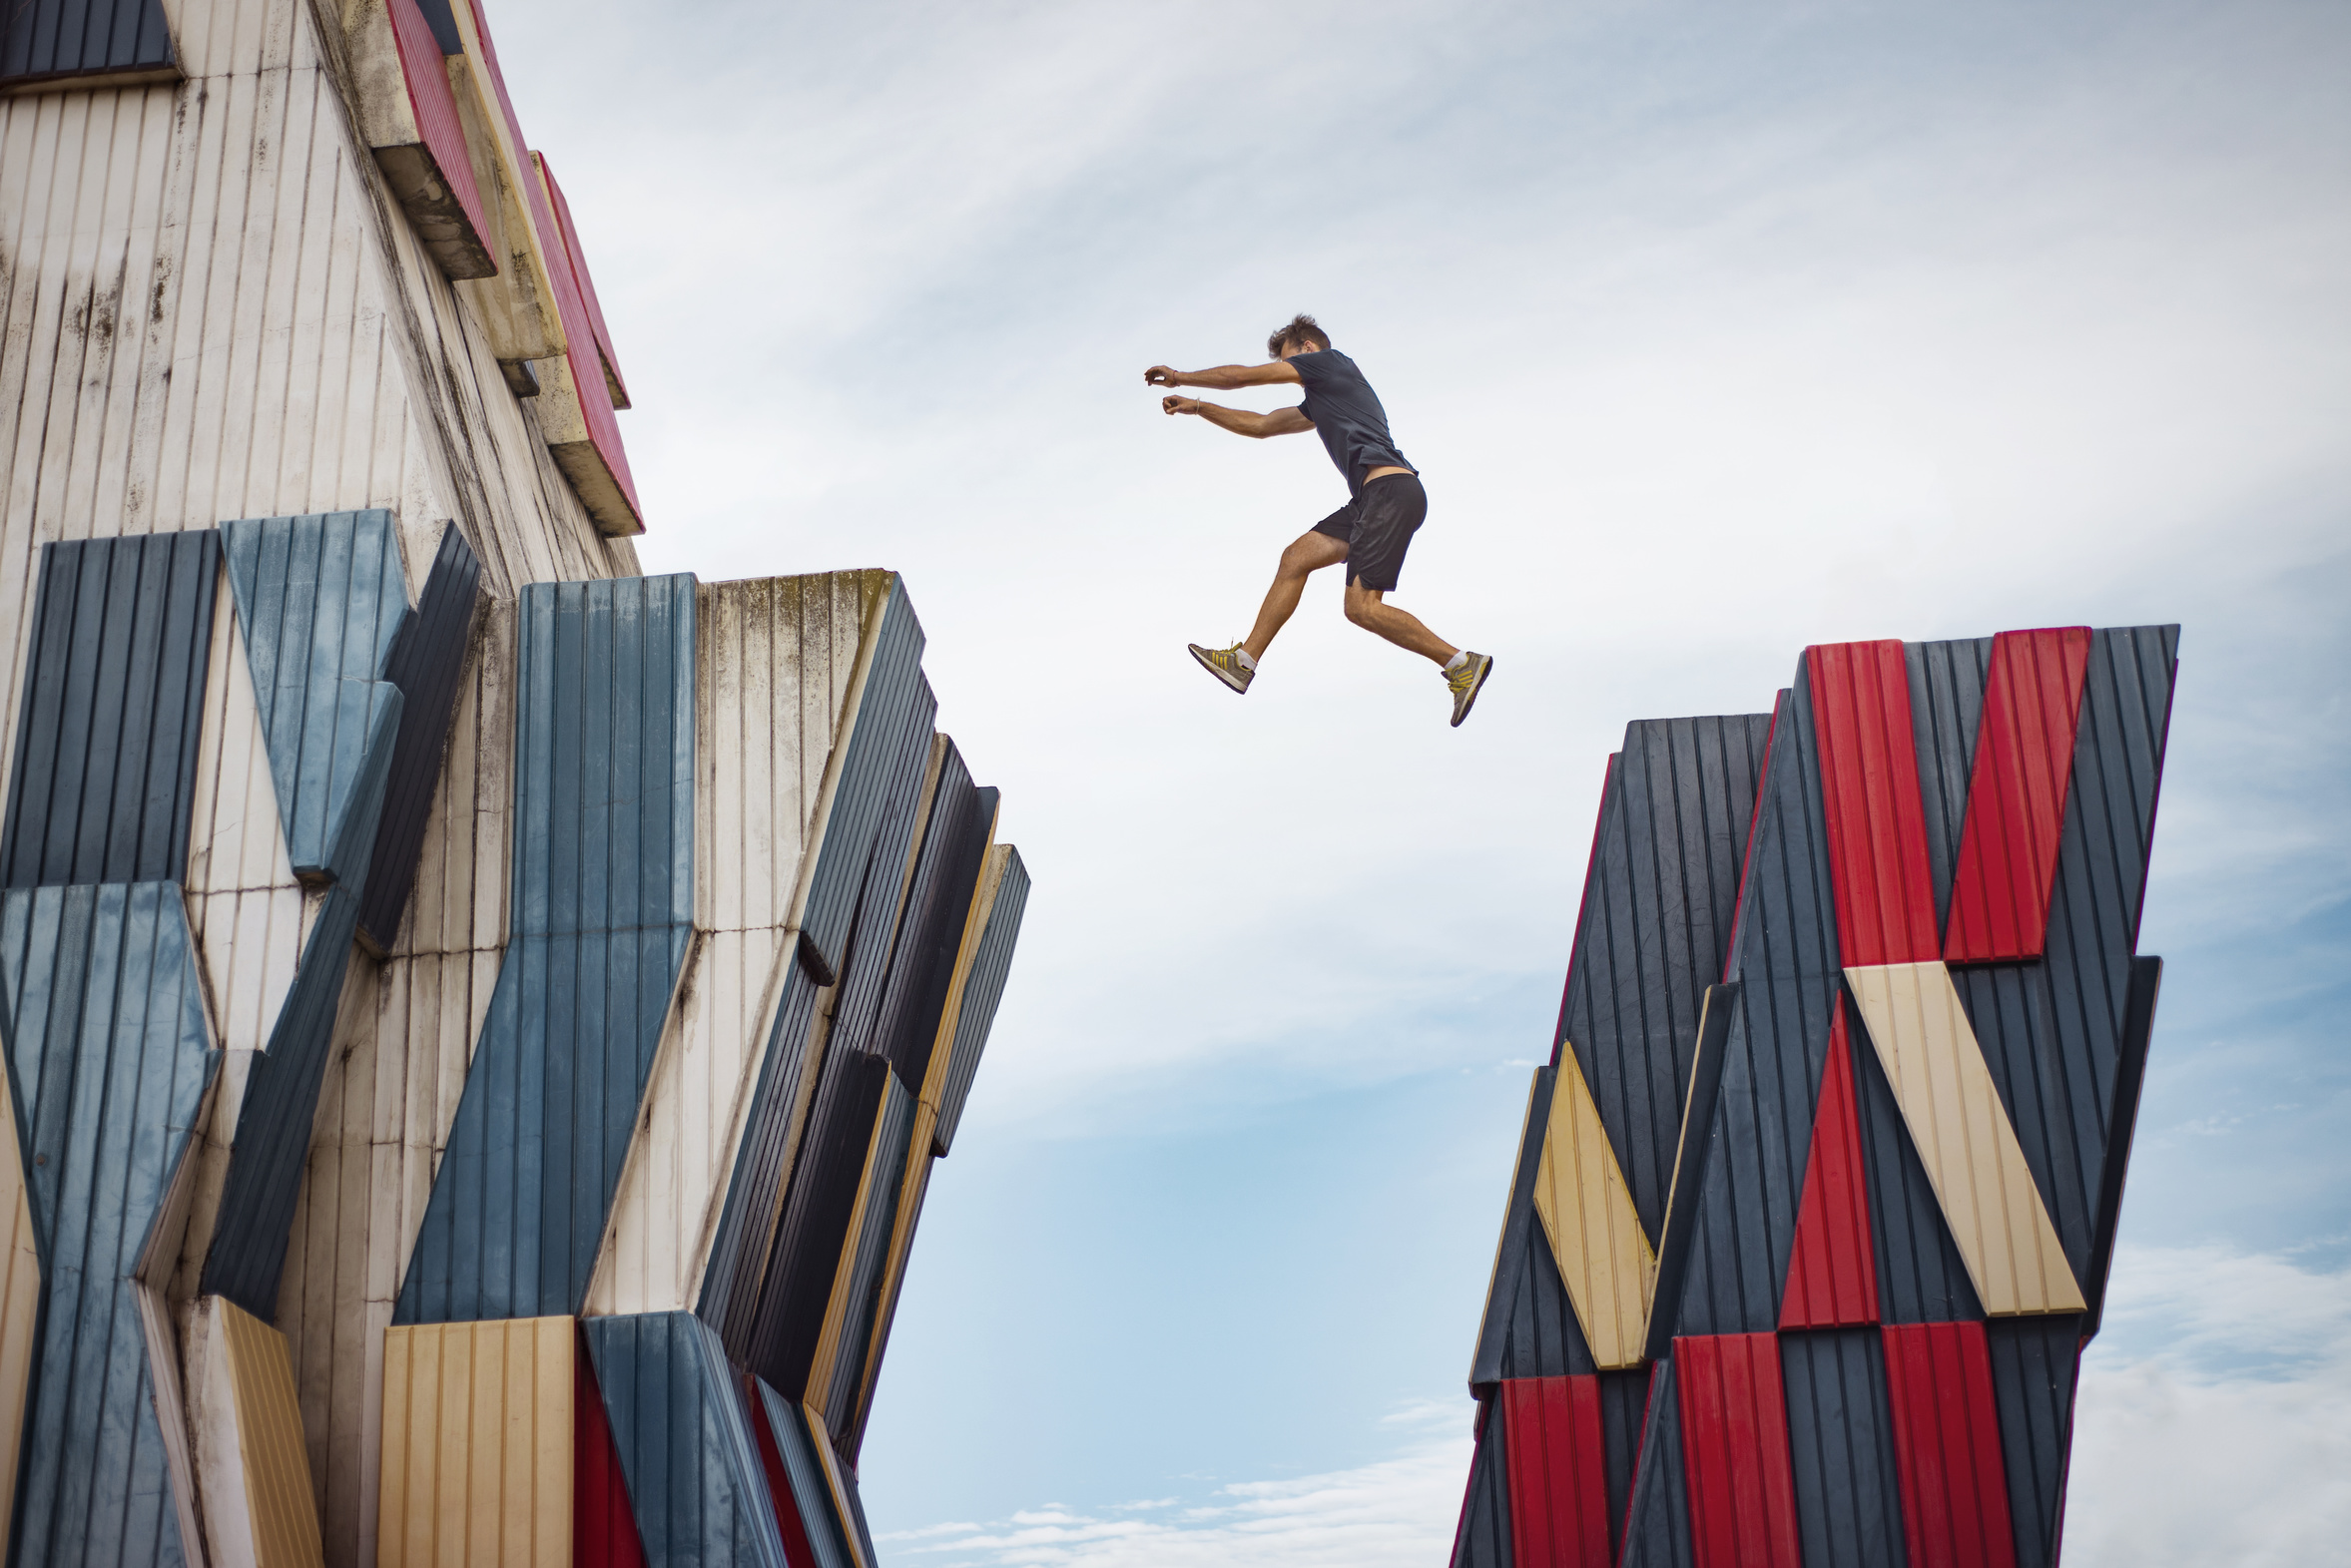 Low angle view of man jumping over buildings against sky